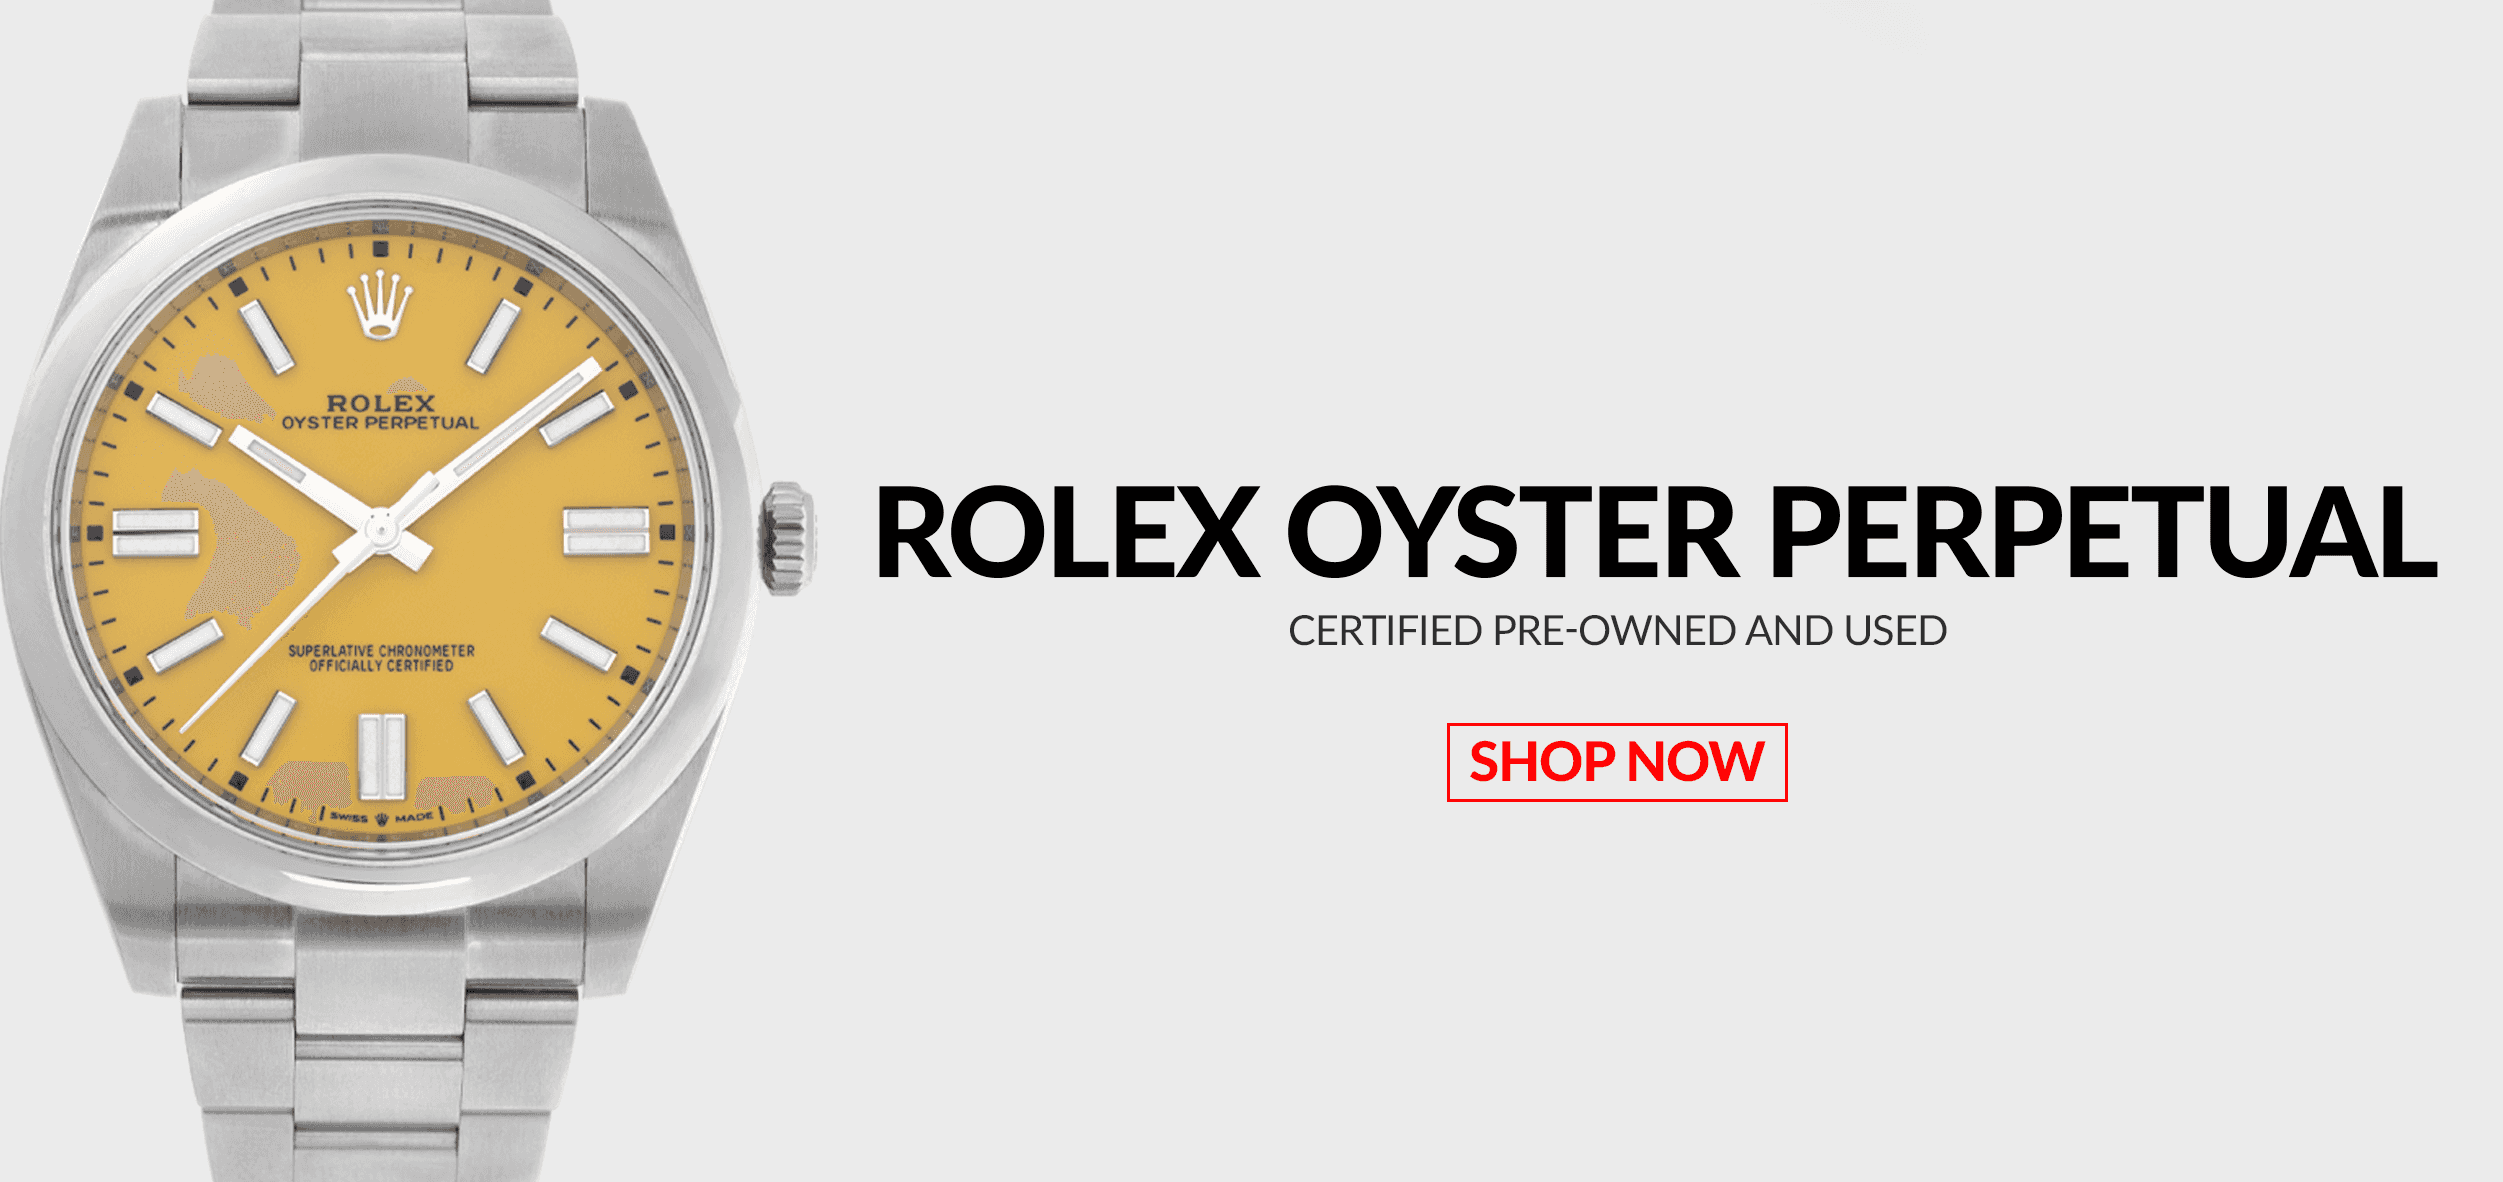 Pre-Owned Certified Used Rolex Oyster Perpetual Watches Header